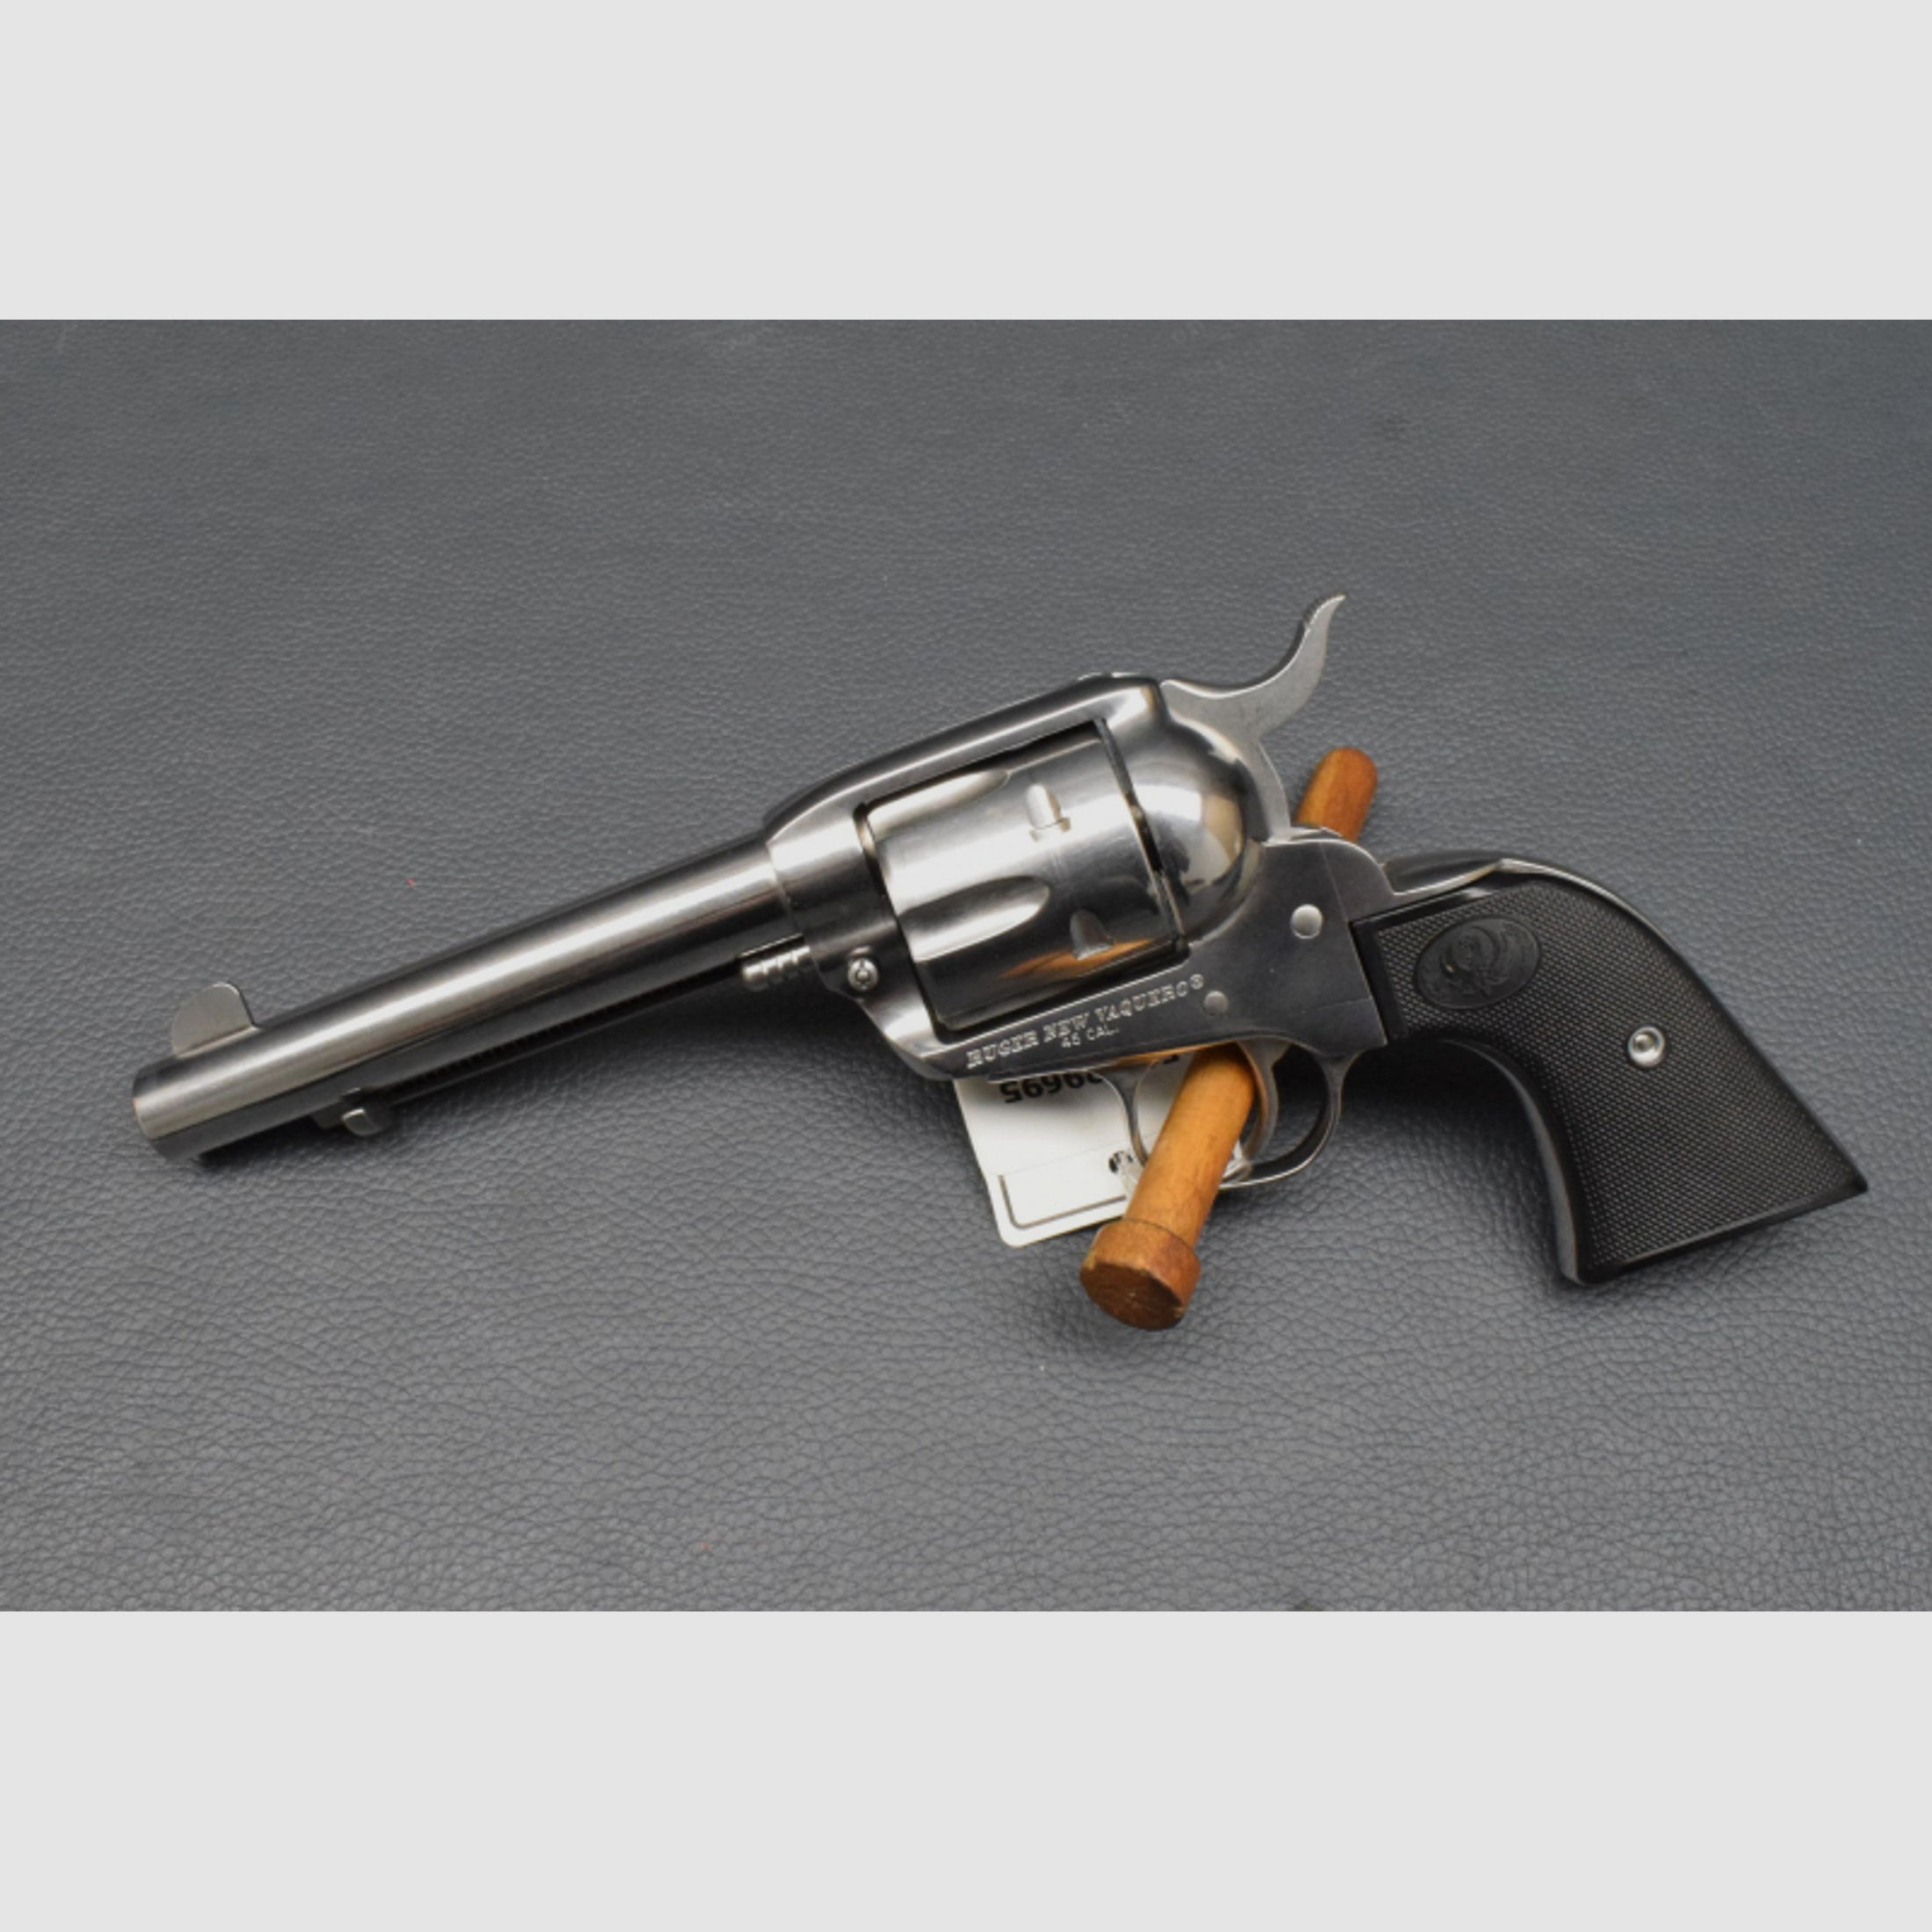 Ruger Modell New Vaquero, 45 Colt, 5,5" Lauf, stainless, Neuware